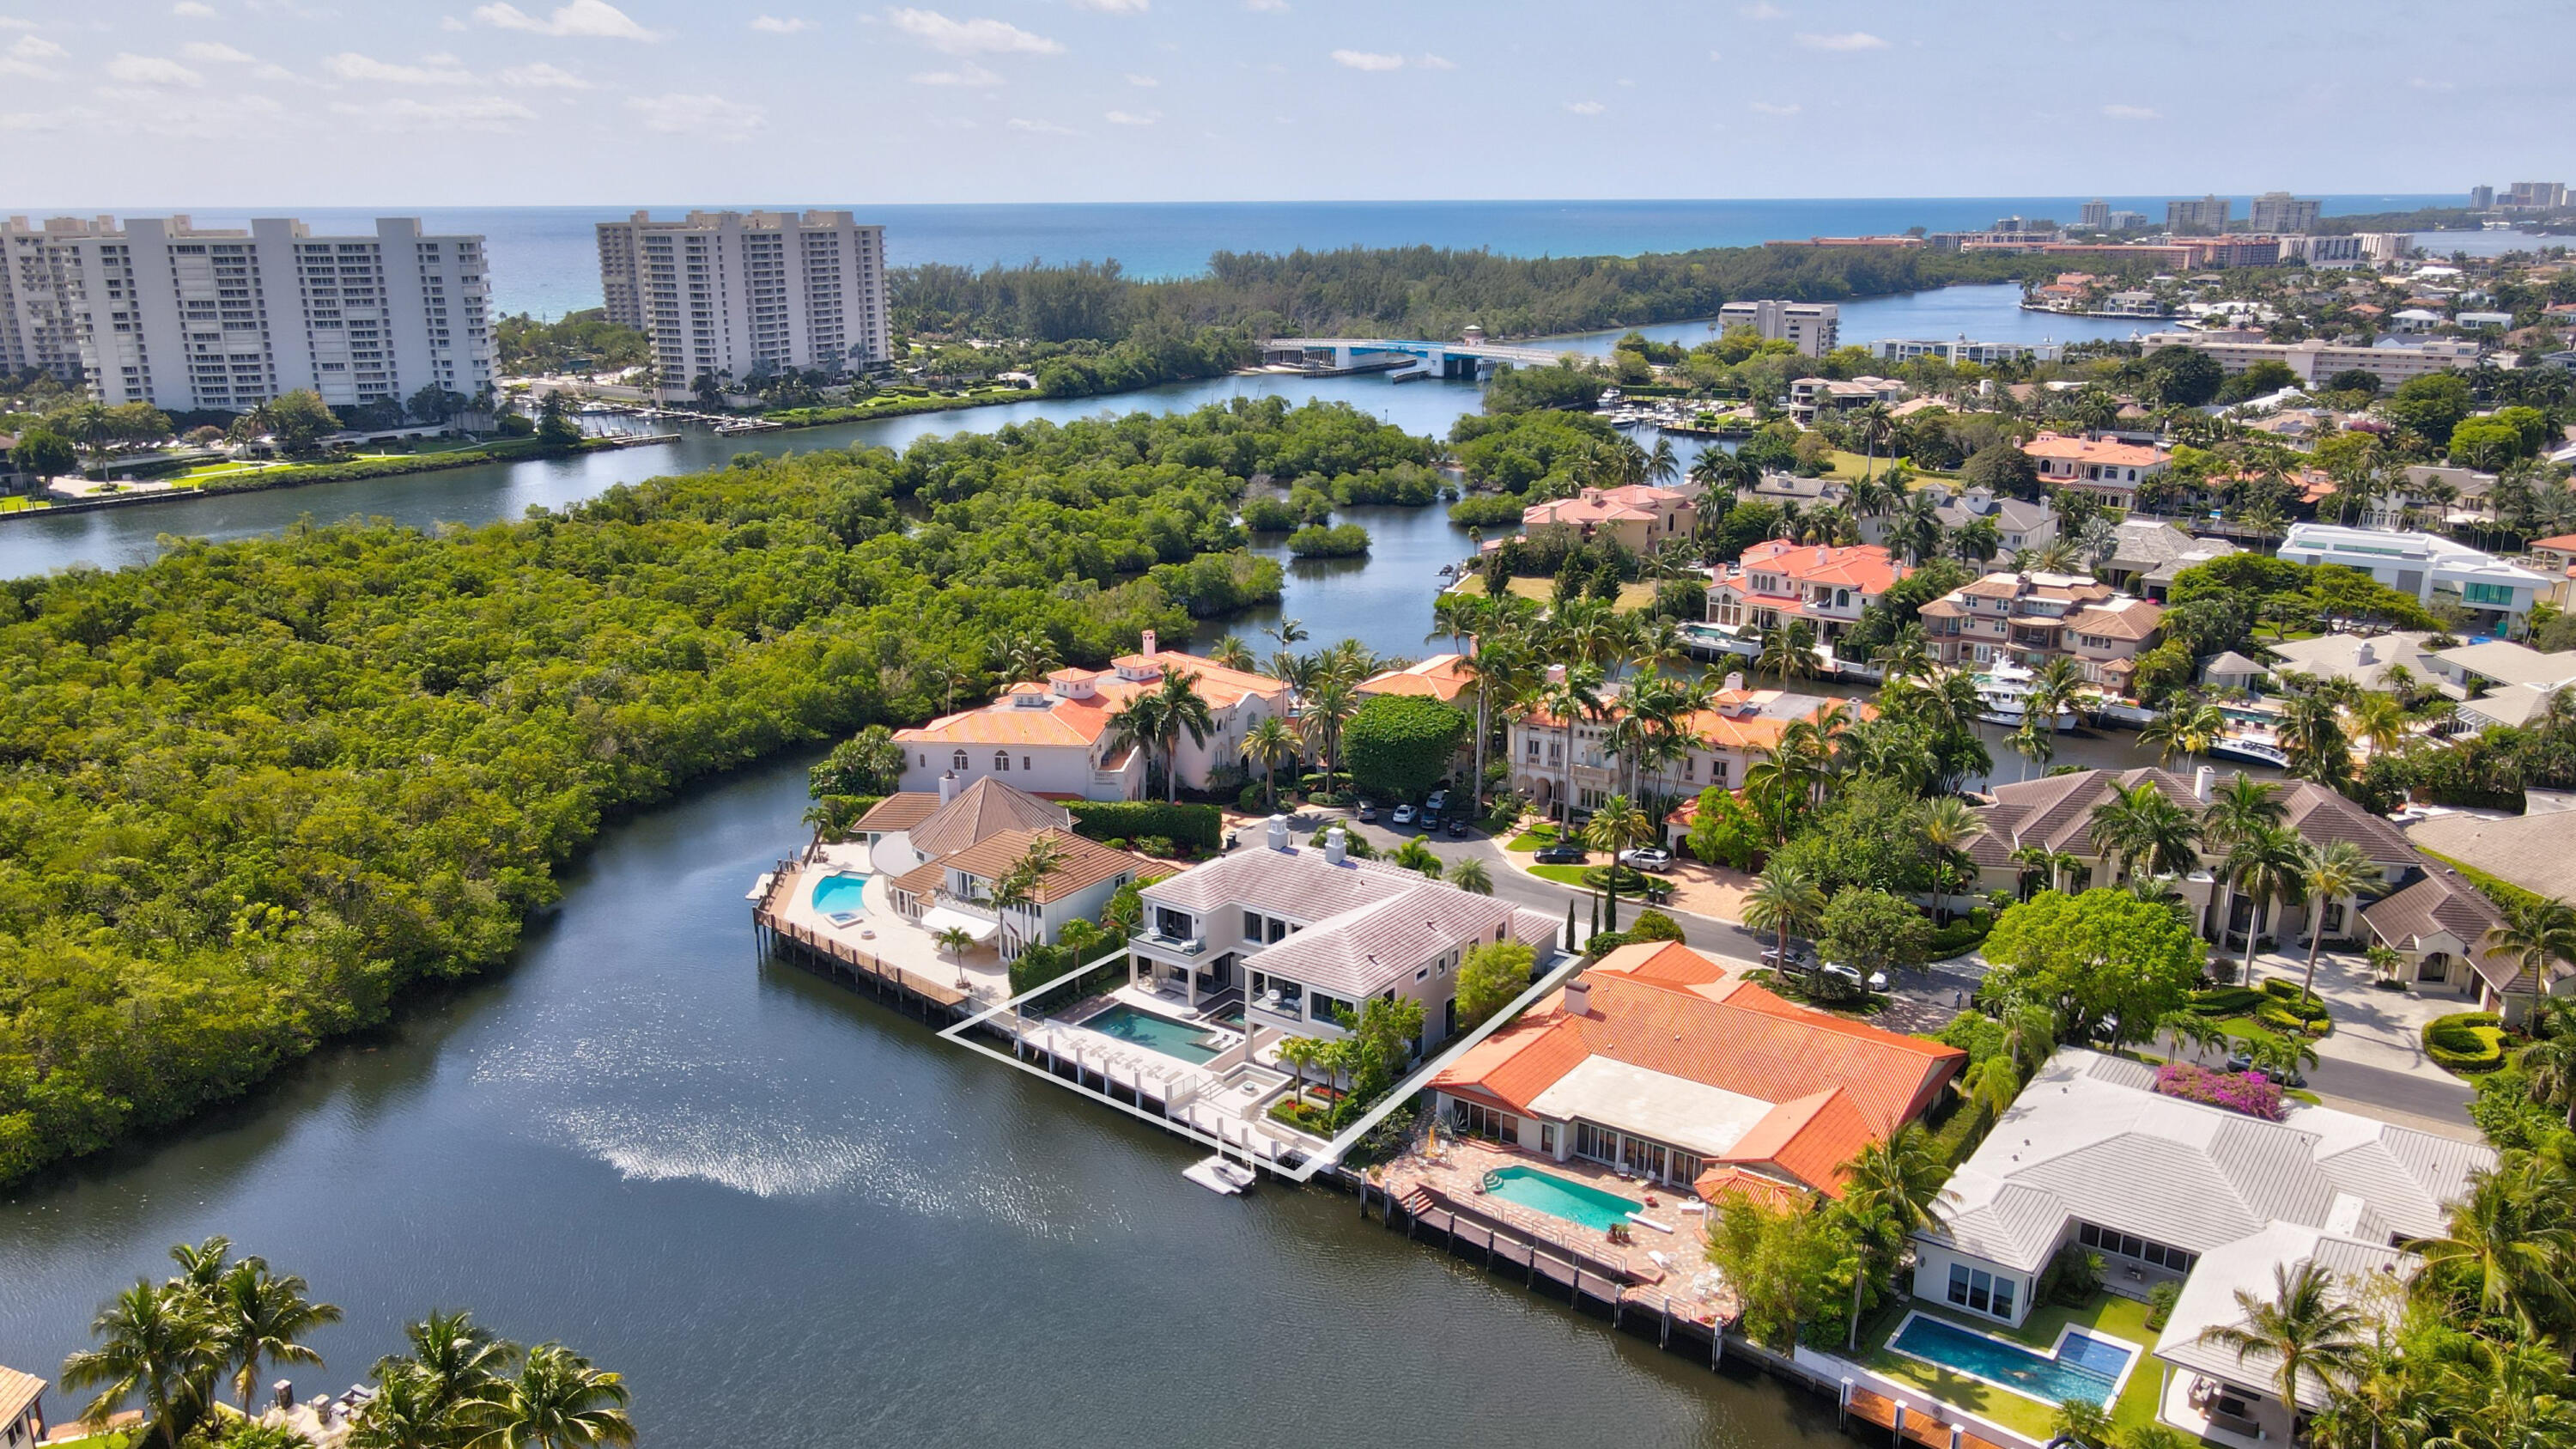 This meticulously maintained two story Transitional contemporary waterfront residence features ocean access and 24/7 security and private roads.  Offered completely furnished and accessorized, it is move-in ready. The entry foyer opens to a two-story great room which overlooks the open pool, covered patio, expansive water views with the natural 'Sanctuary Island' wildlife refuge off in the distance.  The first floor features an office/club room, dining, wine and bar areas, an open kitchen with center island which services the family room and a dinette overlooking the pool.  The second floor features the primary bedroom suite with exercise area and steam shower, a secondary family room, in addition to four en-suite bedrooms.  See MORE... Offered Fully furnished includes art work and accessories.
108 linear feet about dockage with power and water

3 car garage/double high for tandem parking of 6 vehicles

Located on a Cul de sac
Contemporary &#x13; 2 story 
Waterfront &#x13; 108 ft 
Circular driveway pavers &#x13; light gray 
Bermuda grass
Exterior walkway entry night lights
Immaculate maintained landscaping
Very private 
Fenced yard
Navien instant hot water heater 
Gas connection from Florida public utilities 
natural gas fire pit with seating for 14
Carrier AC 3
1 Amana AC
Rain Bird Automated sprinkler system 
Generac generator &#x13; partial 
Exterior and interior full home sound speakers
Control 4 lighting system
Impact glass 
Elevator
Gated, 24/7 security street and water patrol
Automated sliding glass doors in great/family and club rooms
Central floor vacuum system 
Iport controls for home features
Automated/manual window treatments and shades

Natural hardwood engineered floors
10 ft front entry doors

Great room /living room
25ft ceilings
Gas fireplace &#x13; remote controlled 
Wooden Venere fireplace wall accent


Powder room 
Marble counter
Tile wall

Office/Family room
Built in shelves &amp; Cabinetry
Bar
Subzero wine cooler
Wet bar sink
Ice machine
Flat screen TV
Built in cabinetry

Billiard table/ currently in dining room 
Built in cabinetry 
Wine cellar &#x13; glass walk in area
Separate bar room 
Ice maker 
Wet bar sink

KITCHEN
Marble center island
Contemporary white 
2 subzero refrigerator
2 subzero freezer drawers
2 wall oven WOLF
Wolf warming drawer
Wolf 6 gas range with griddle
Wolf microwave
Miele dishwashers
Koehler stainless steel double kitchen sink 


Full Pantry
first and second floor Laundry rooms 
GE washer and dryer 
Storage space
Backsplash
Primary suite
Hardwood floors throughout
Opens up to patio/pool
Primary bathroom
Roman shower with steps 
Oversized tub 
Dual sinks
Vanity
Oversized tub
Plantation shutters
Walk in closet with custom built cabinetry
Service breakfast bar with Marble top 
Wet sink
Spa/gym room in primary suite 
Steam shower with bench seating 
POOL
Size 40 x 17 
Natural stone marble 24 x 24 tile deck
Pebbletec
infinity edge spa with translucent gold  and silver tiles
Seats 12 in spa
Hayward natural pool gas heater
Aqualink Jandy pool control
Sun deck with built in pool seating

PATIO
Covered patio sitting area 
Summer kitchen
Wet bar sink
Wolf Grill
Outdoor subzero mini refrigerator
Outdoor marble counter top with seating for 2
Water filtration system
Gas fire pit
with outdoor bench seating for 12+

Dock has Power outlets
Water at dock

Cabana bath 



Garage &#x13; 3 car 
Epoxy flooring 
Built in garage cabinets 
Car lift height


Staircase
Contemporary steel rails 
Fixed glass

ELEVATOR
Wood panel 
Standard size 
Natural dark stain wooden floors
Hardwood floors

Bedroom 2 
NE balcony walk out
En-suite 

Bedroom 3
En-suite

Bridge to loft

5 En-suite bedrooms

Upstairs utility room
Terraza counter top 
2 Electrolux washer and dryers

Community amenities; two tennis courts, one sport court children's play area and 20 slip nonfuel marina

US proof of funds required prior to all showings.    


